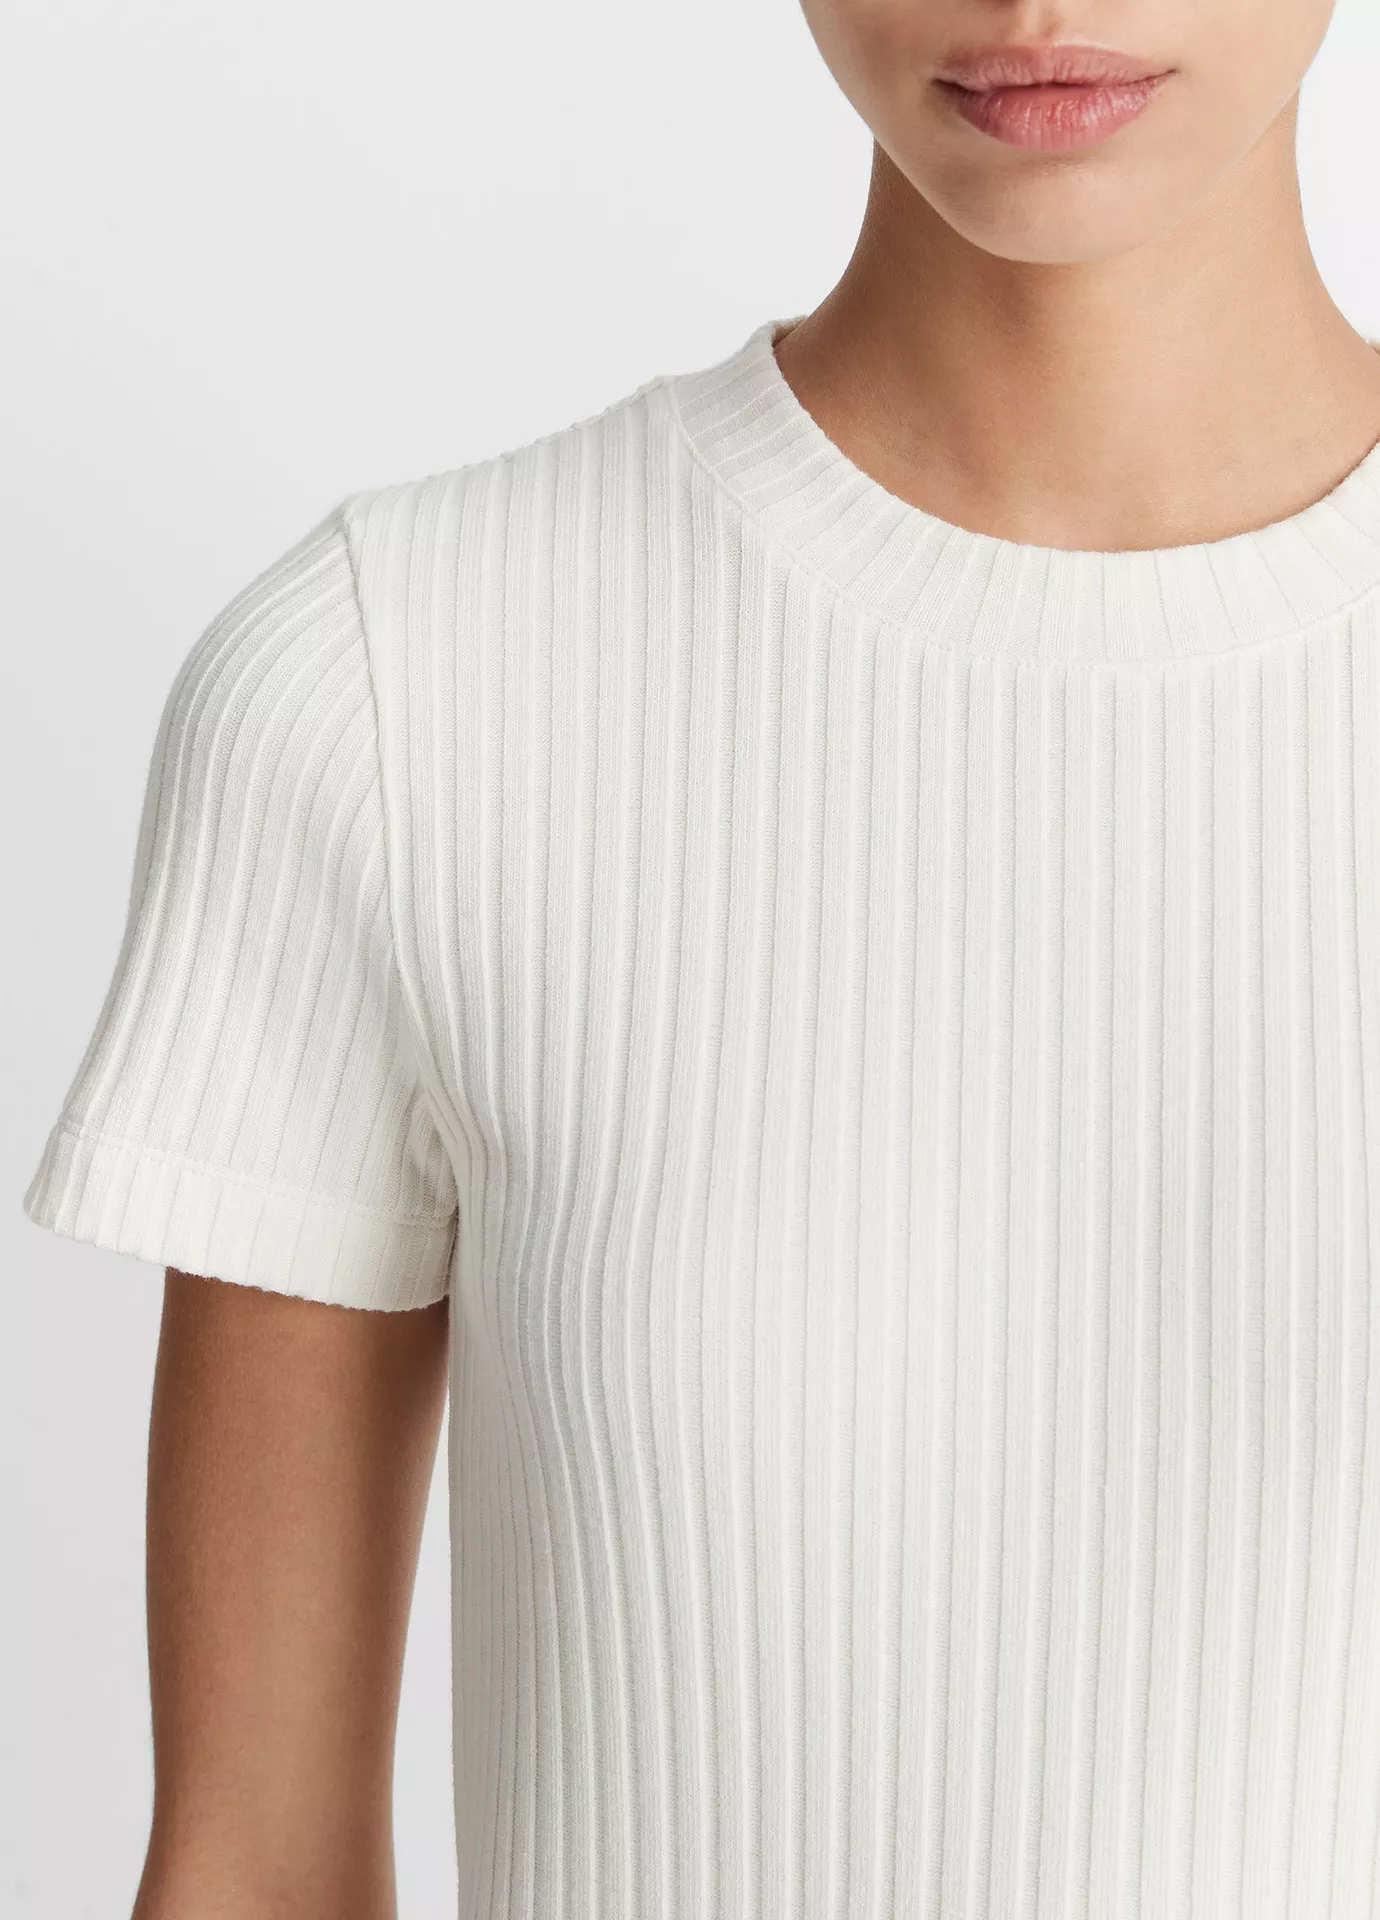 RIBBED SHORT SLEEVE CREW NECK T-SHIRT IN OFF WHITE - Romi Boutique